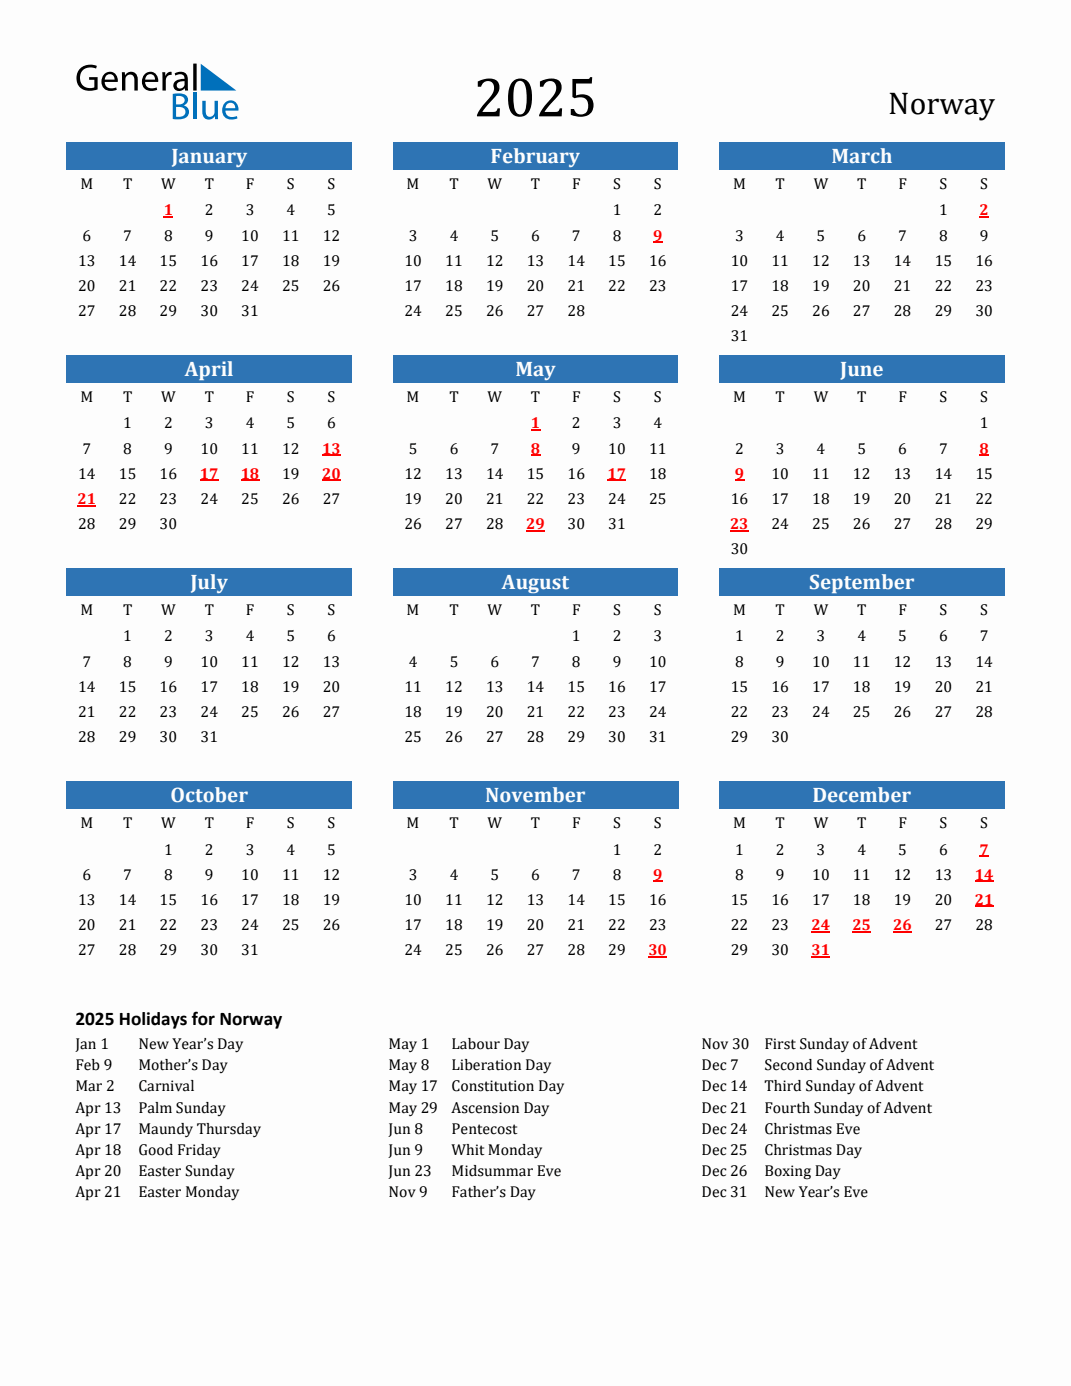 2025 Holiday Calendar for Norway Monday Start